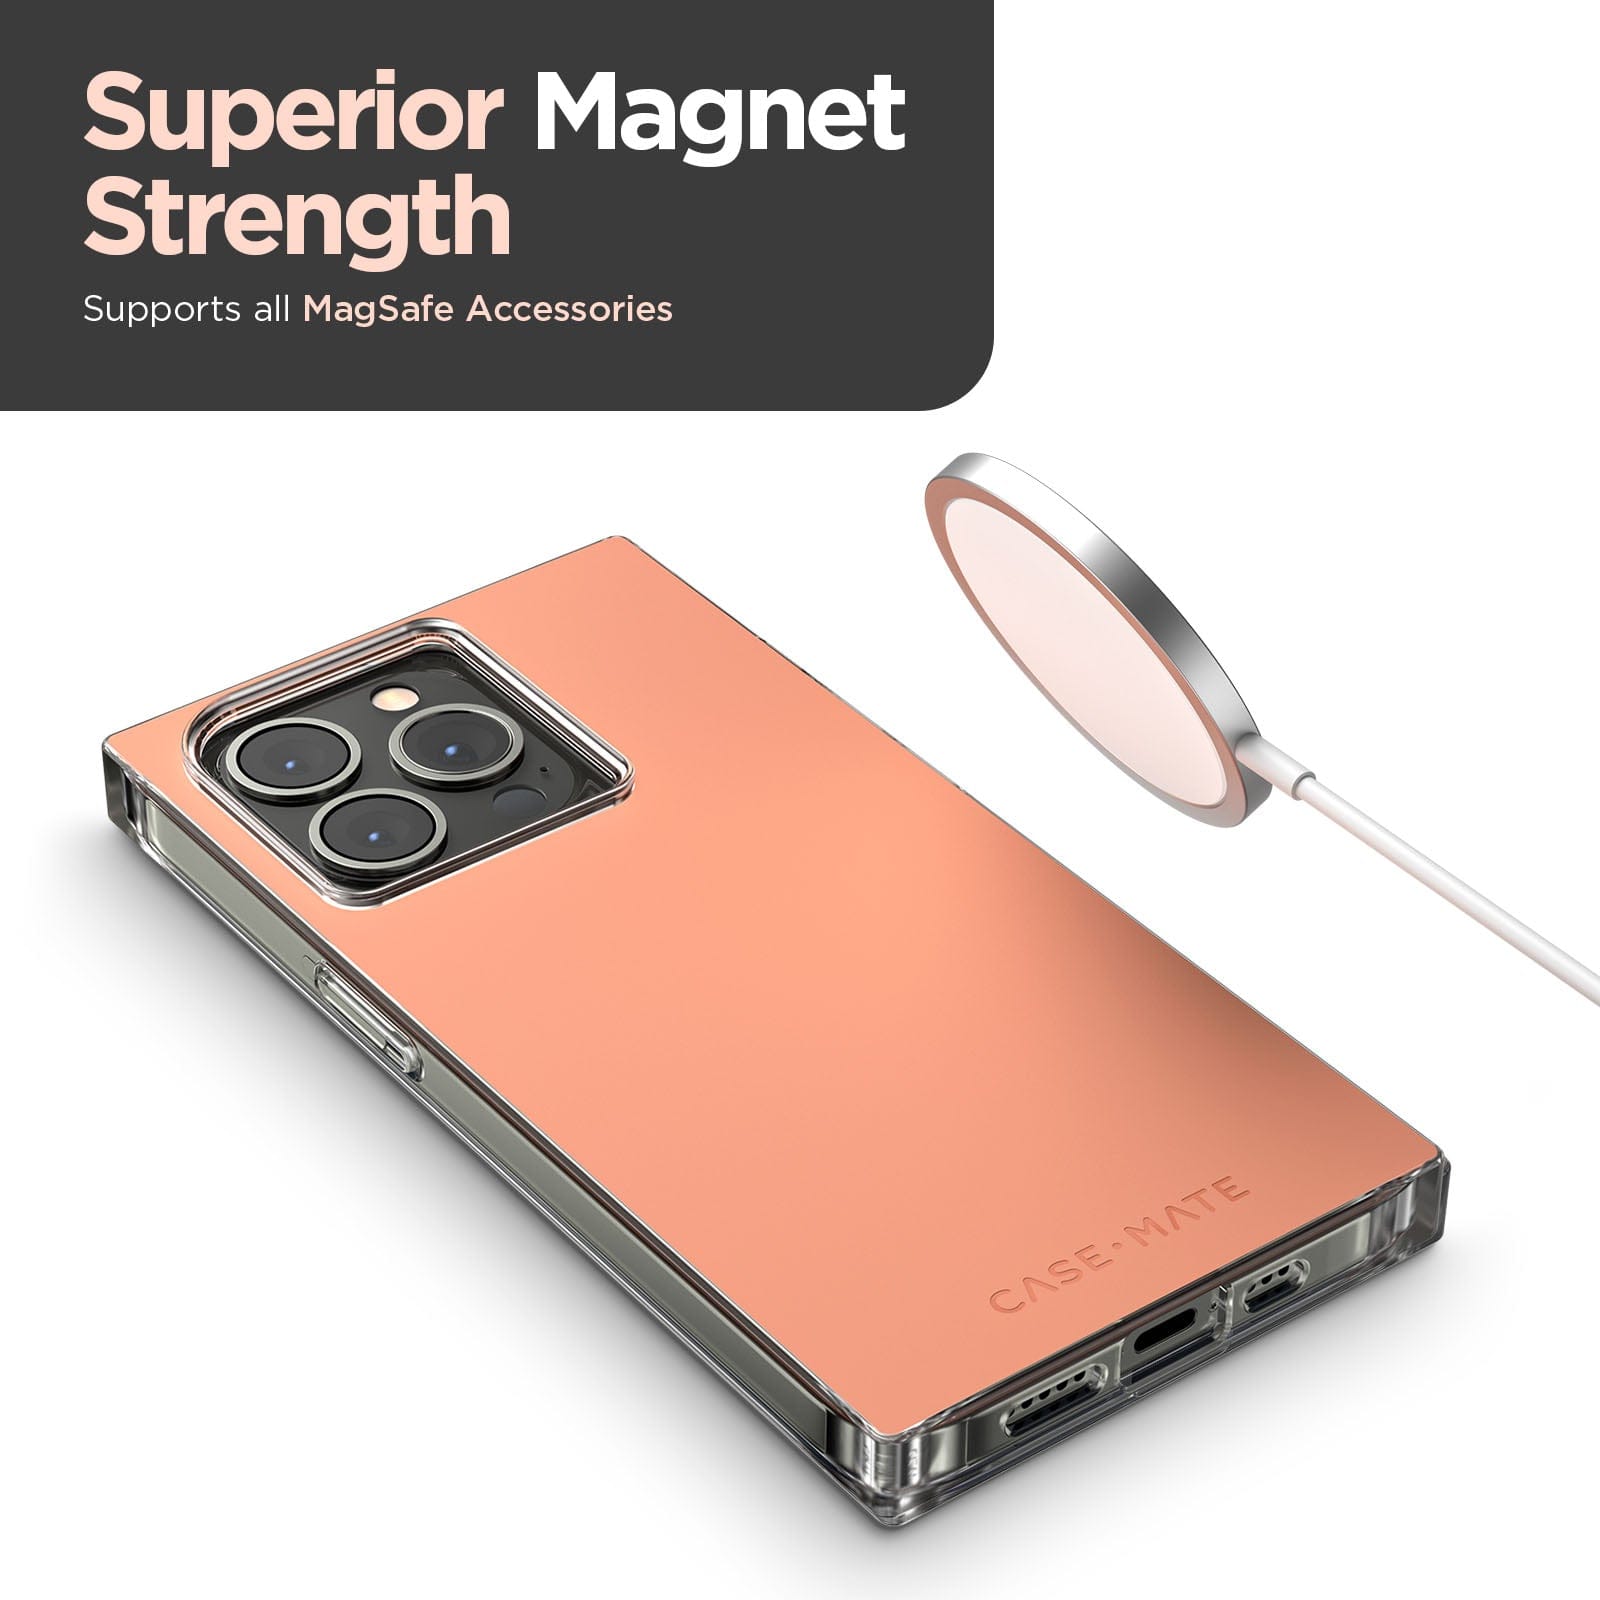 Superior magnet strength supports all MagSafe accessories. color::Clay Pink